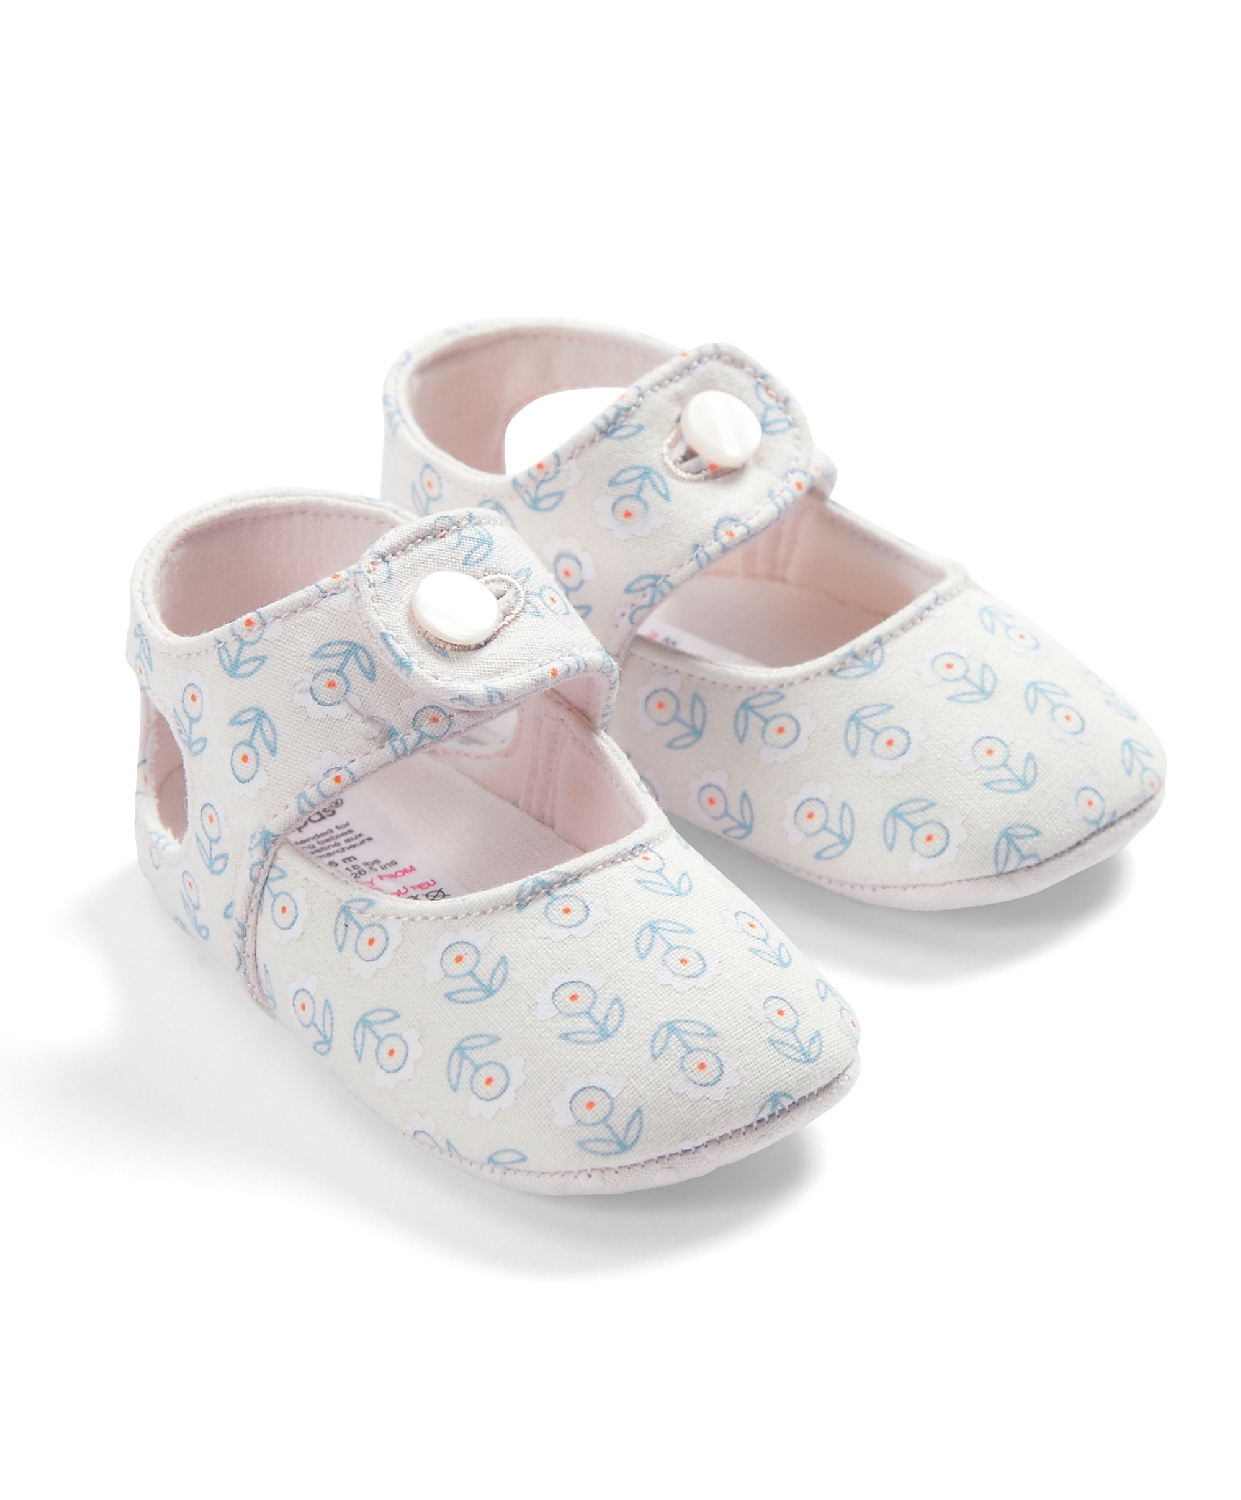 s912h28-flwr-button-shoes--pink-